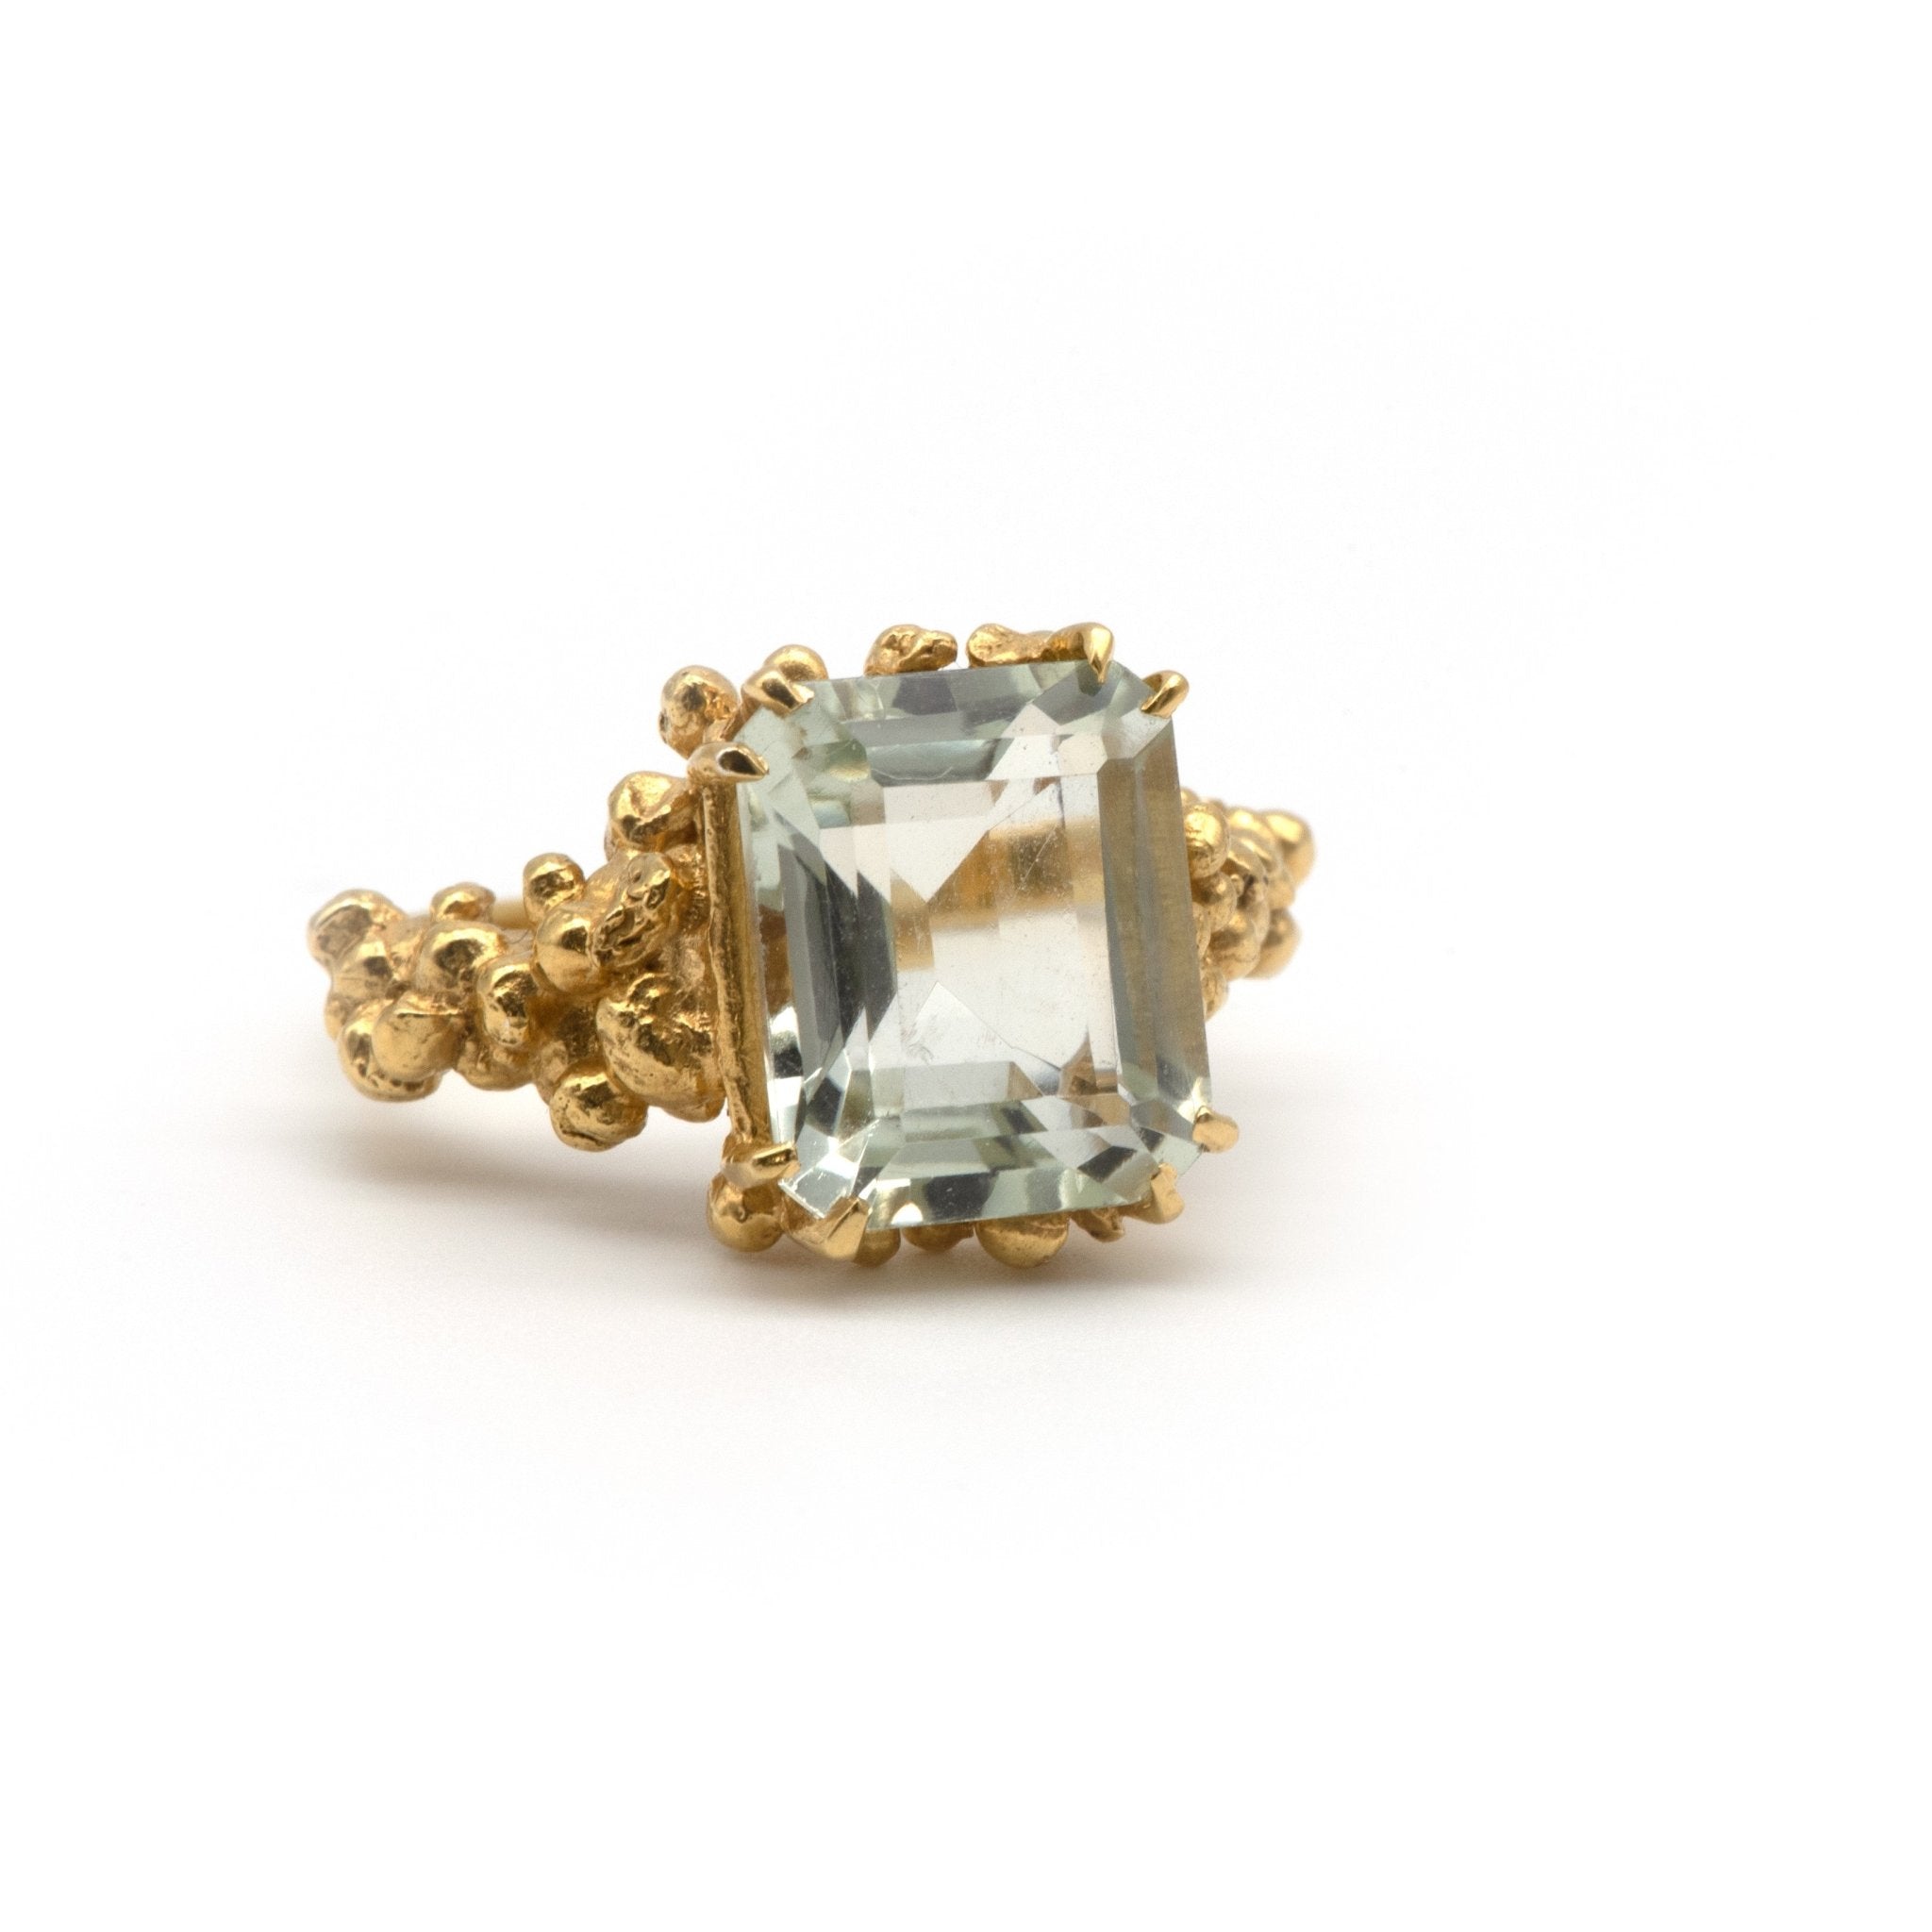 The Giselle Ring - Dainty London